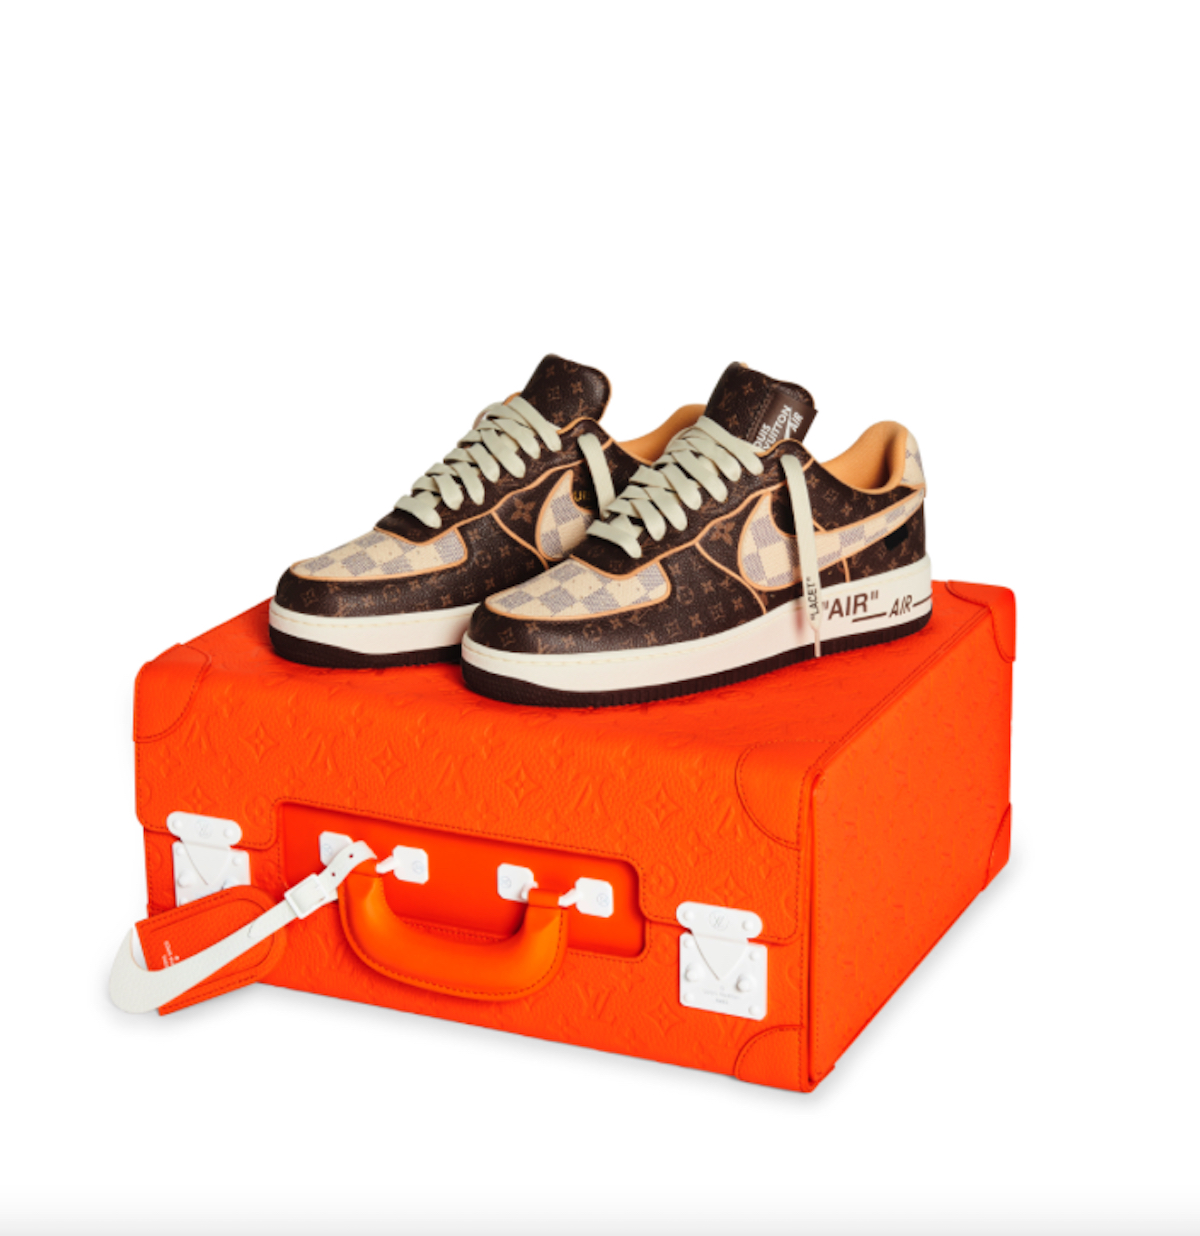 Louis Vuitton x Nike Air Force 1 By Virgil Abloh Will Release On July 19th  - Sneaker News